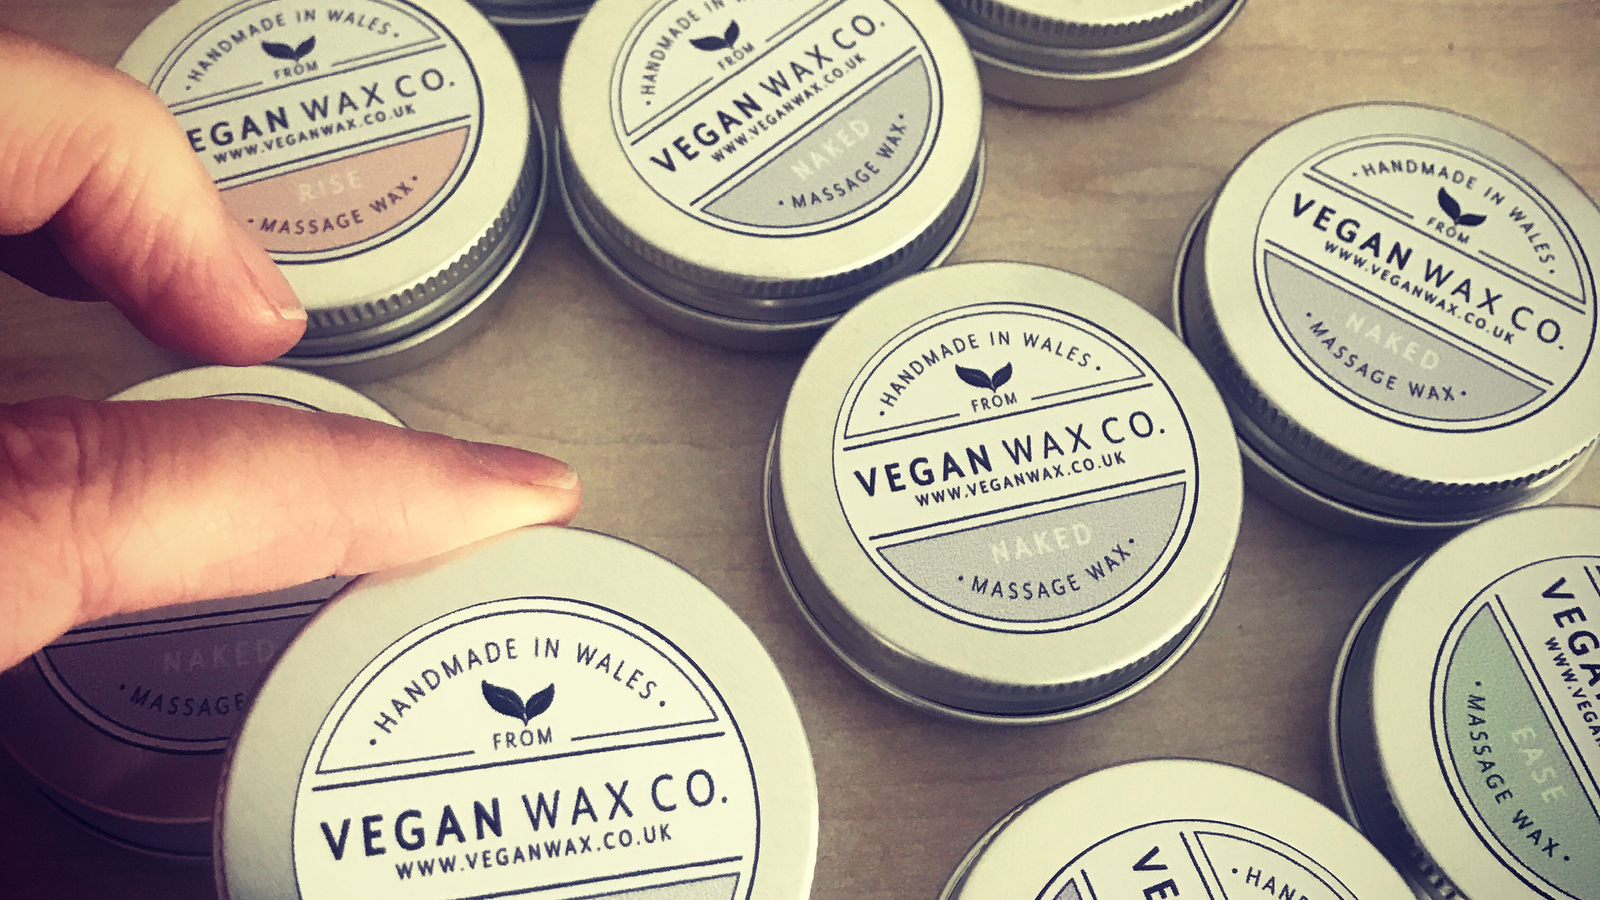 Vegan Wax Co. aluminium tin packaging being picked up and purchased.